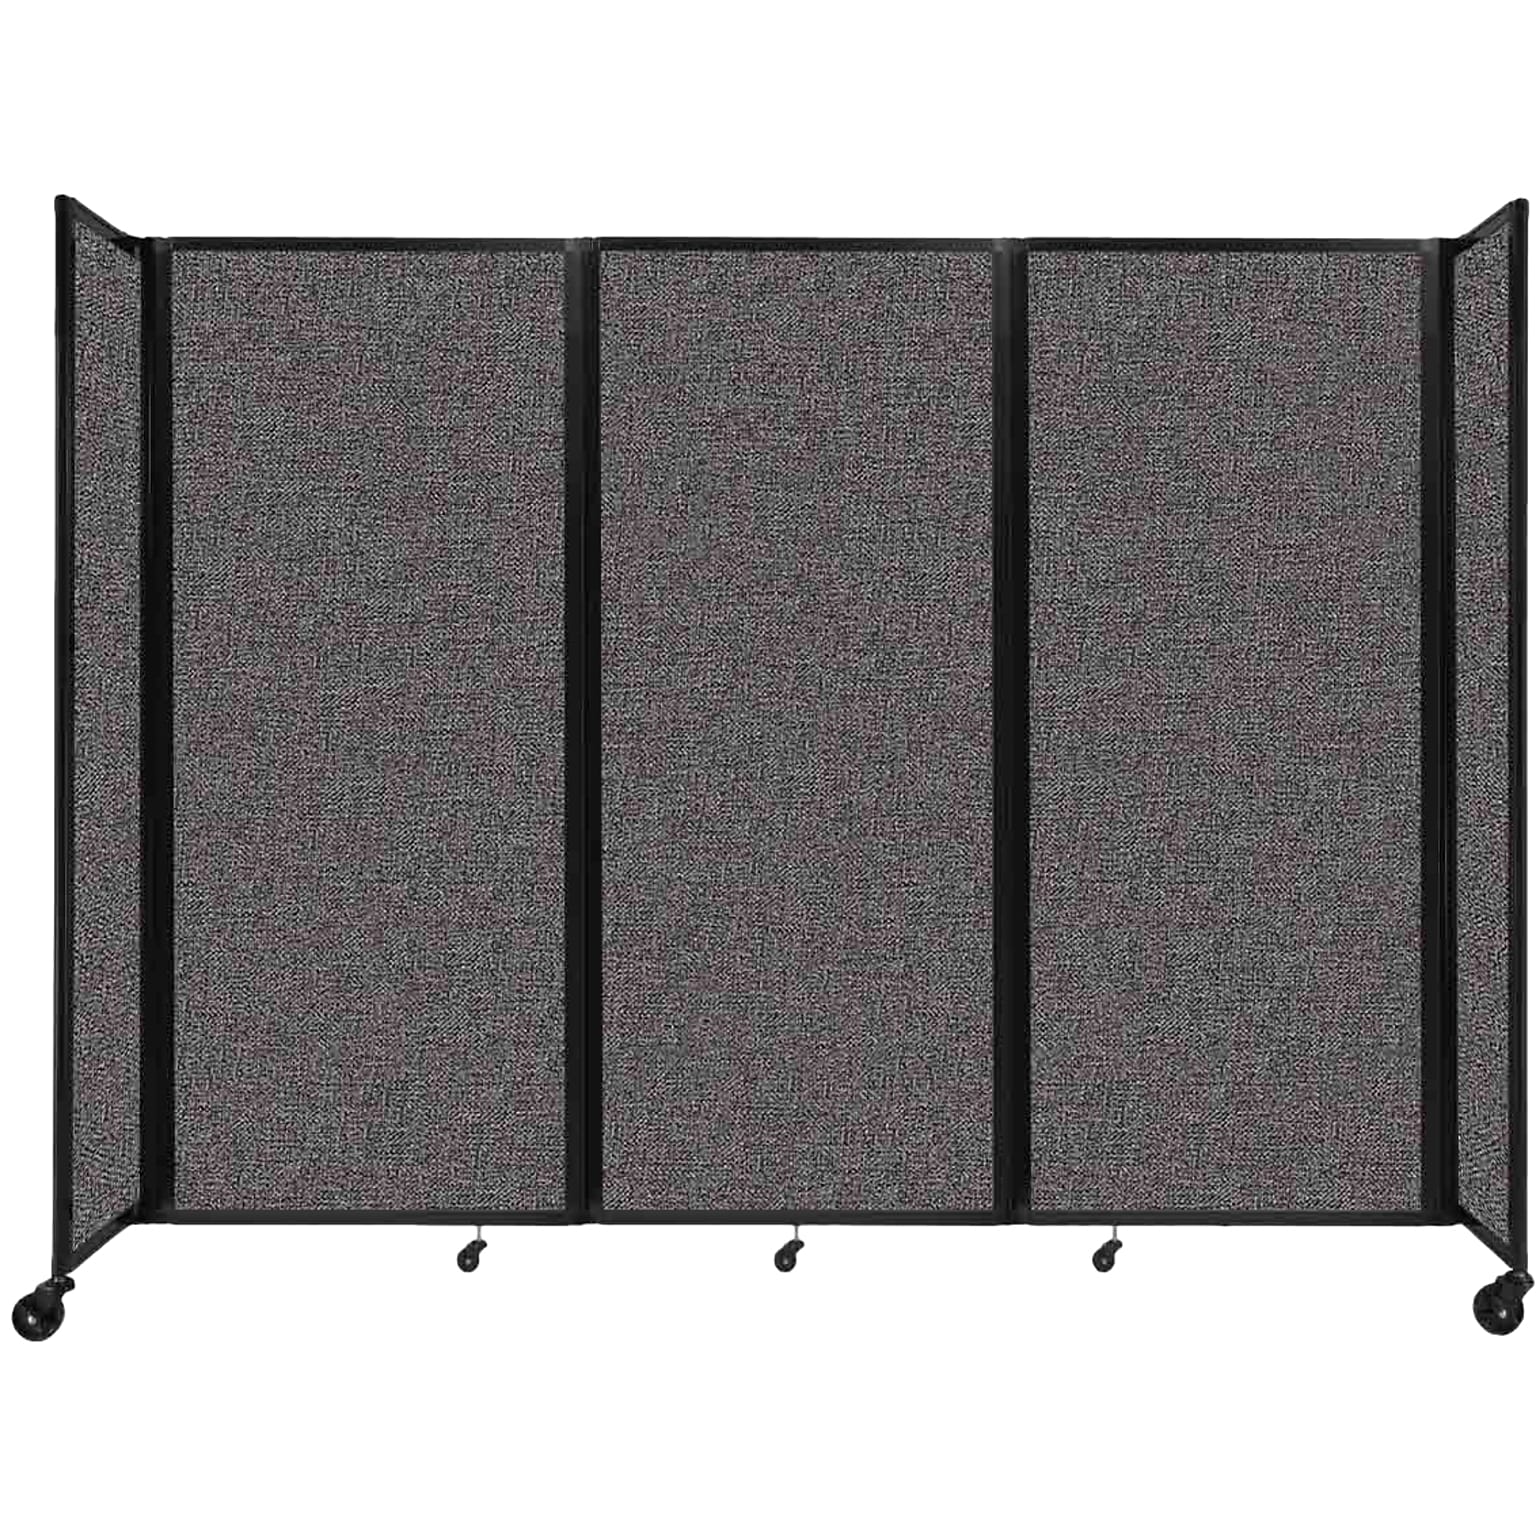 Versare The Room Divider 360 Freestanding Folding Portable Partition, 82H x 102W, Charcoal Gray Fabric (1182307)